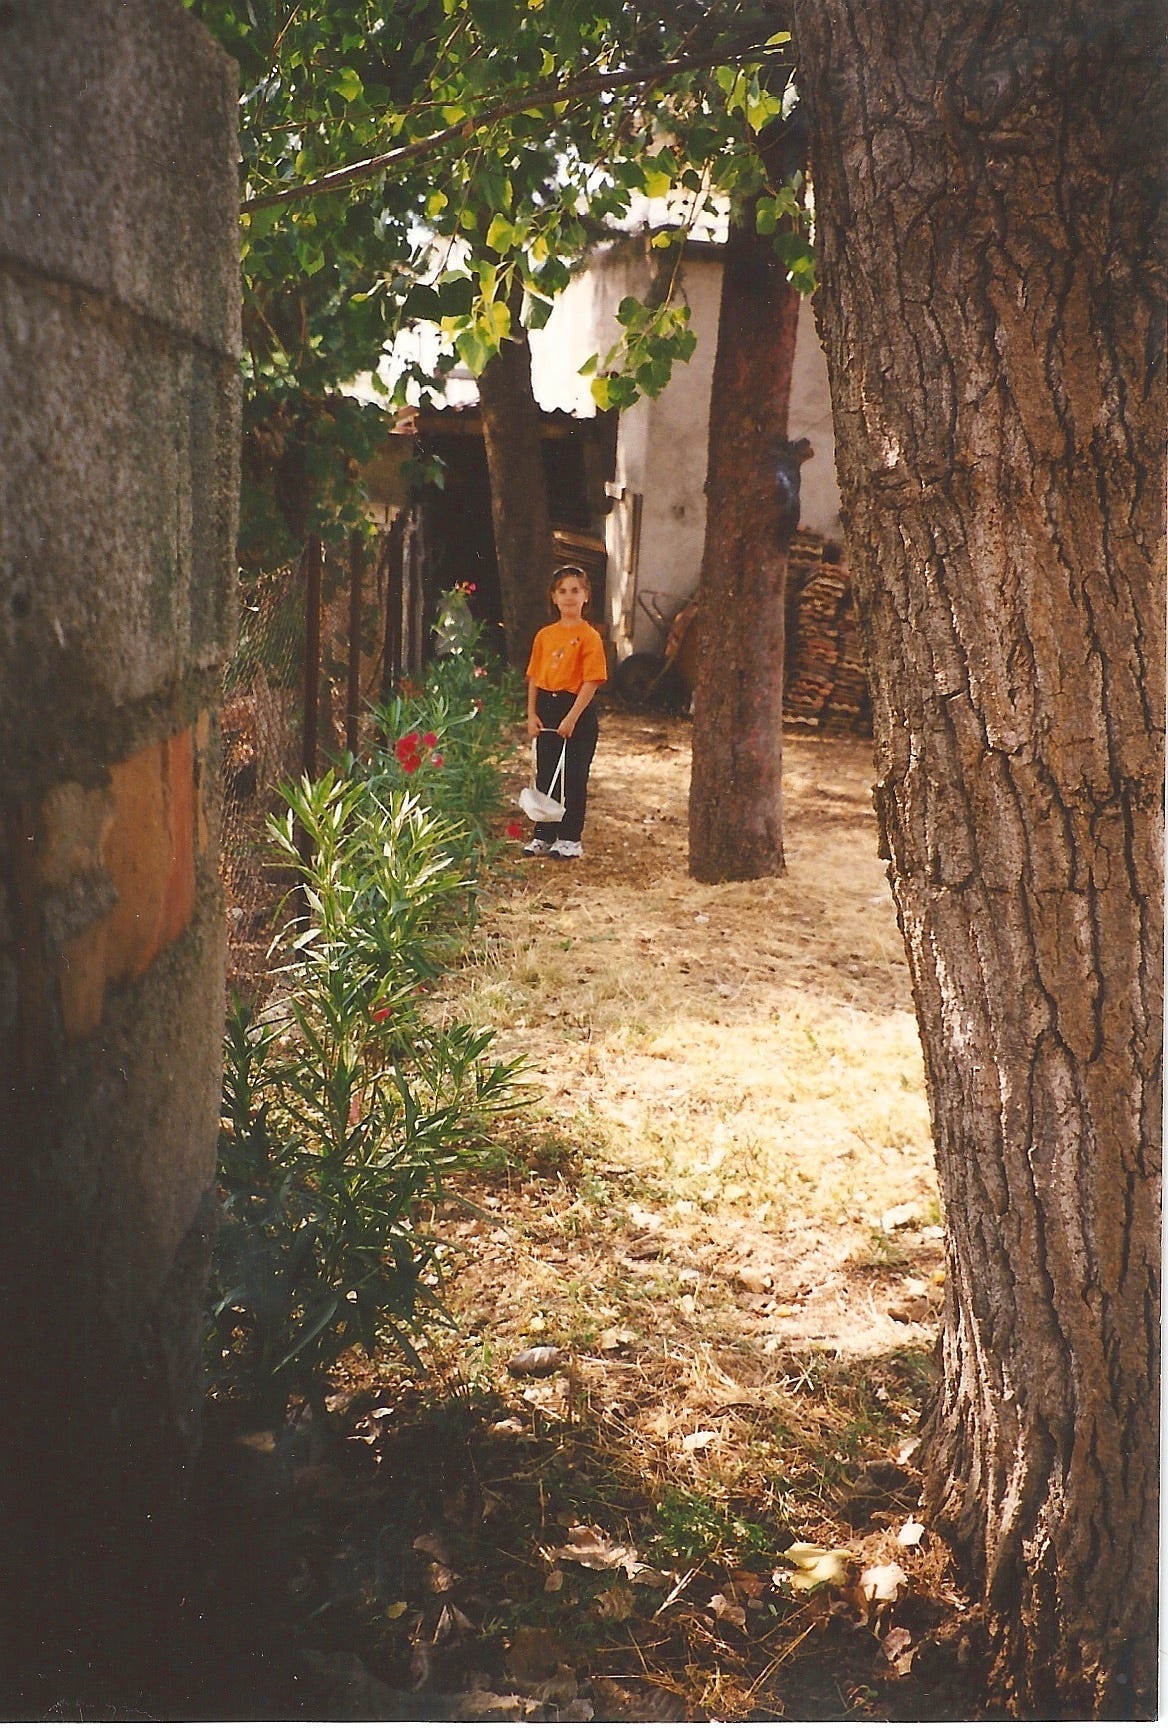 A young Cassandra poses next to a tree in a backyard. Red flowers grow along the fence. The lawn is patchy and yellow.